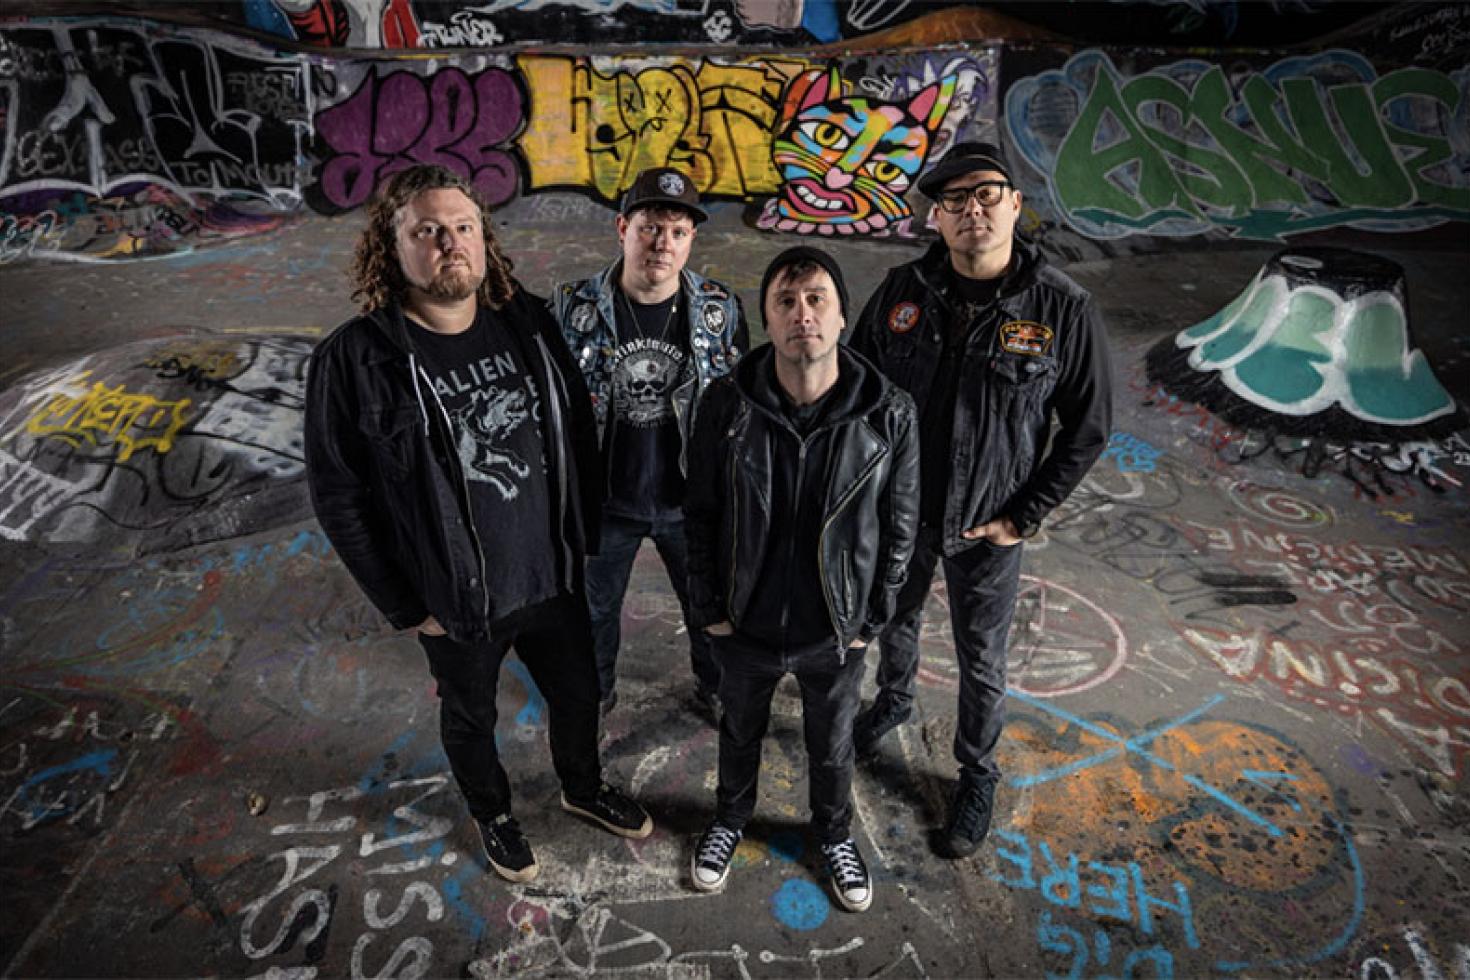 Vancouver skatepunks The Corps announce new members